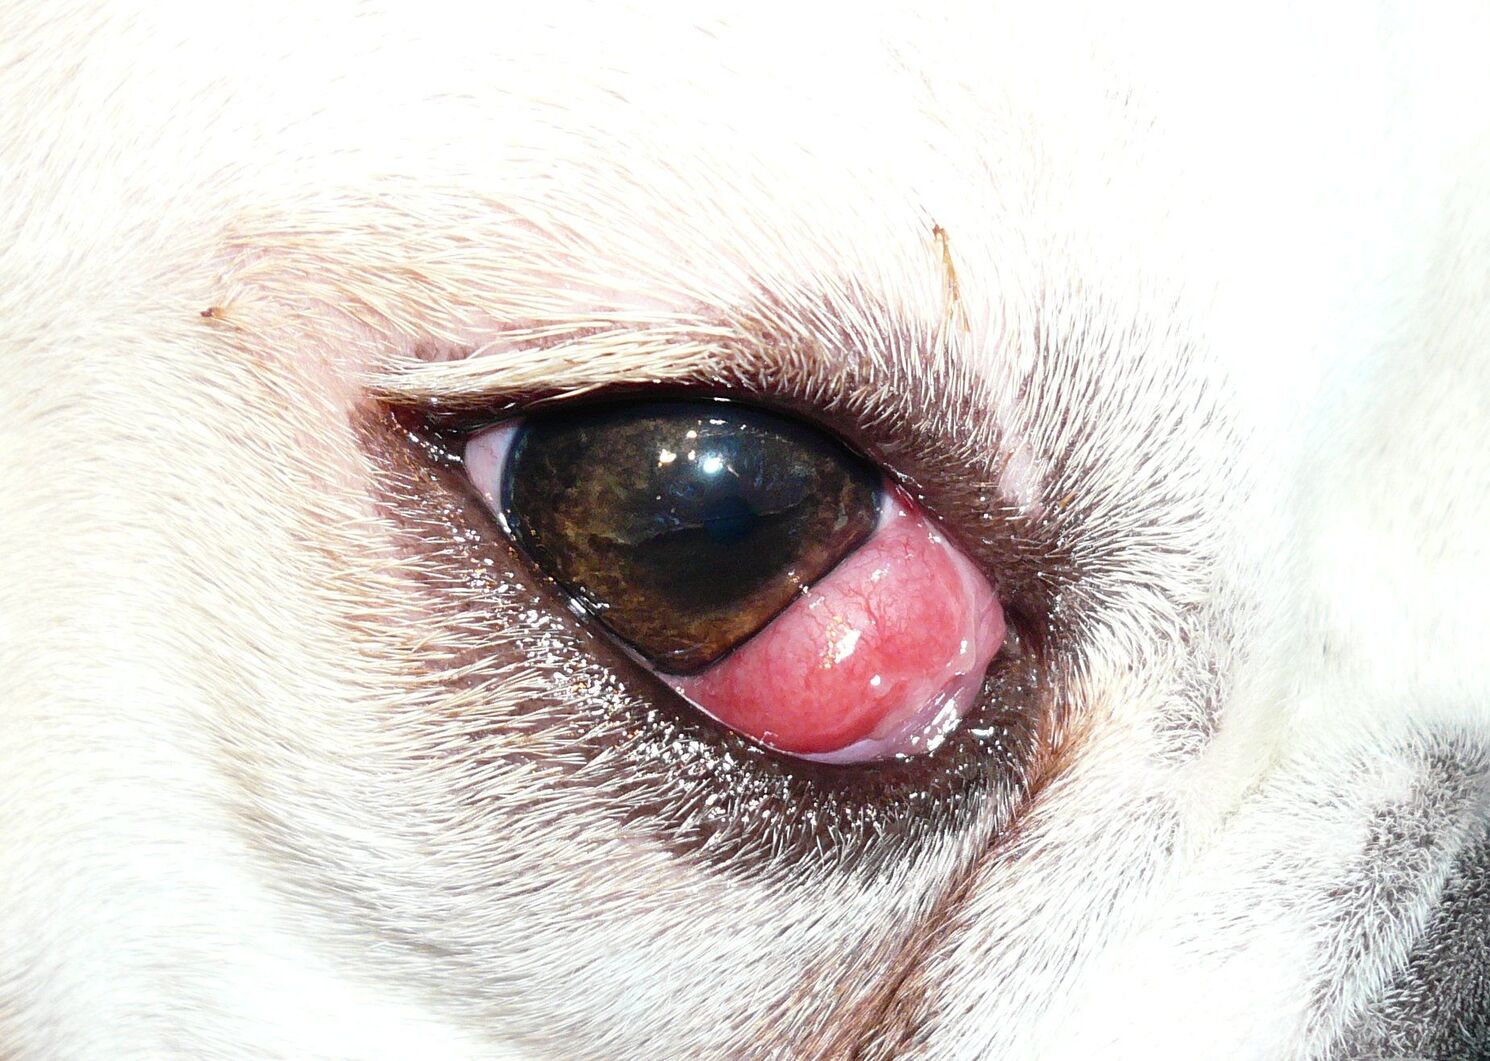 What Antibiotic Is Used For Dog Eye Infection?